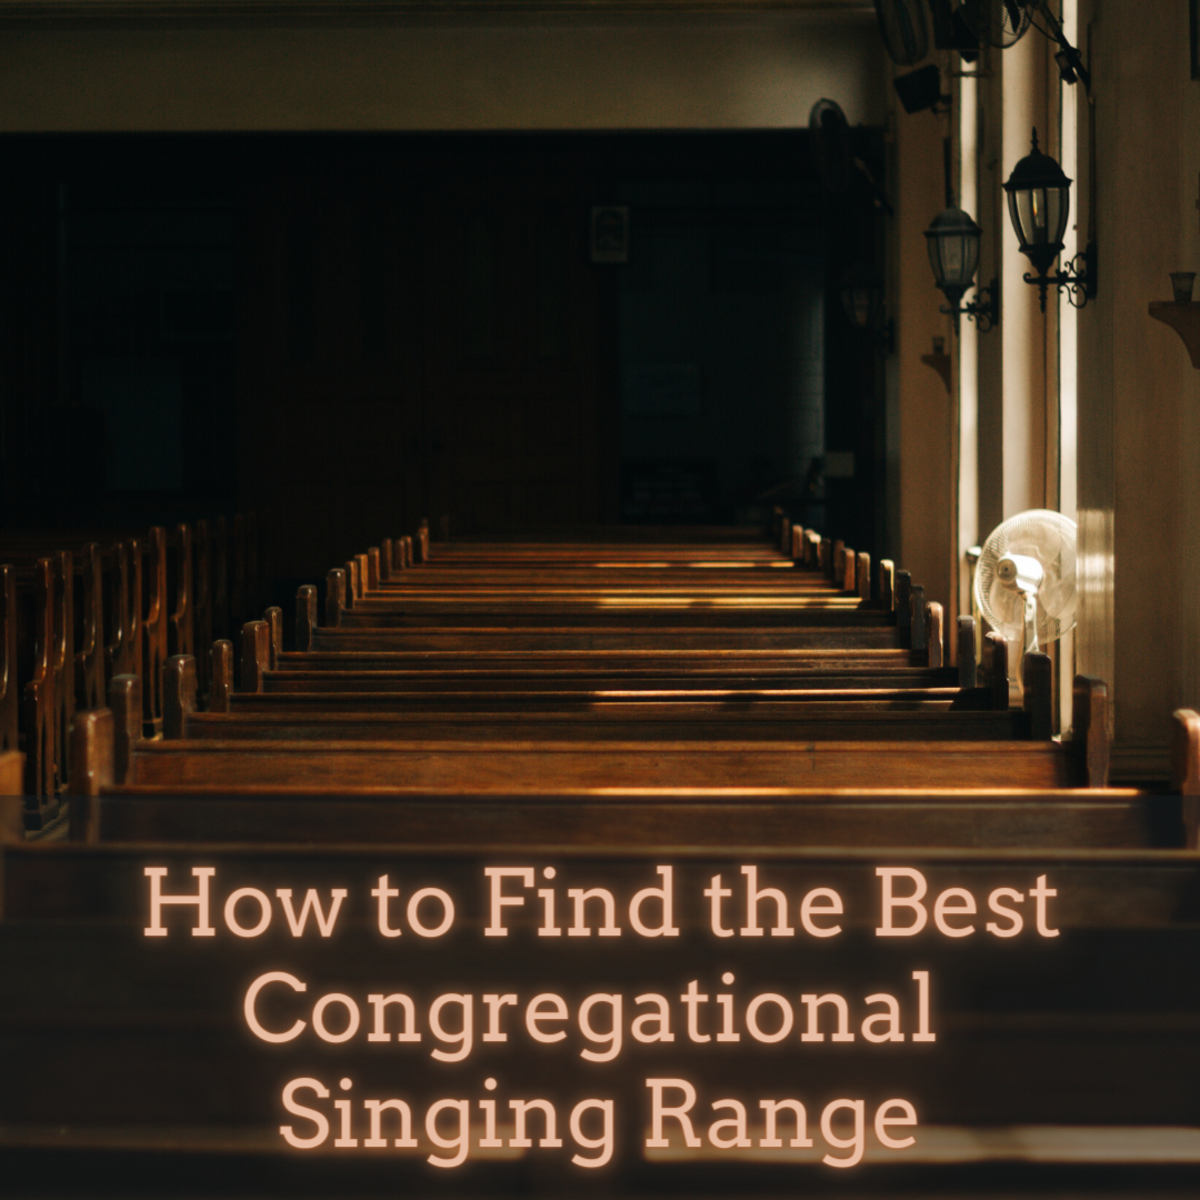 The Key to the Best Congregational Singing Range